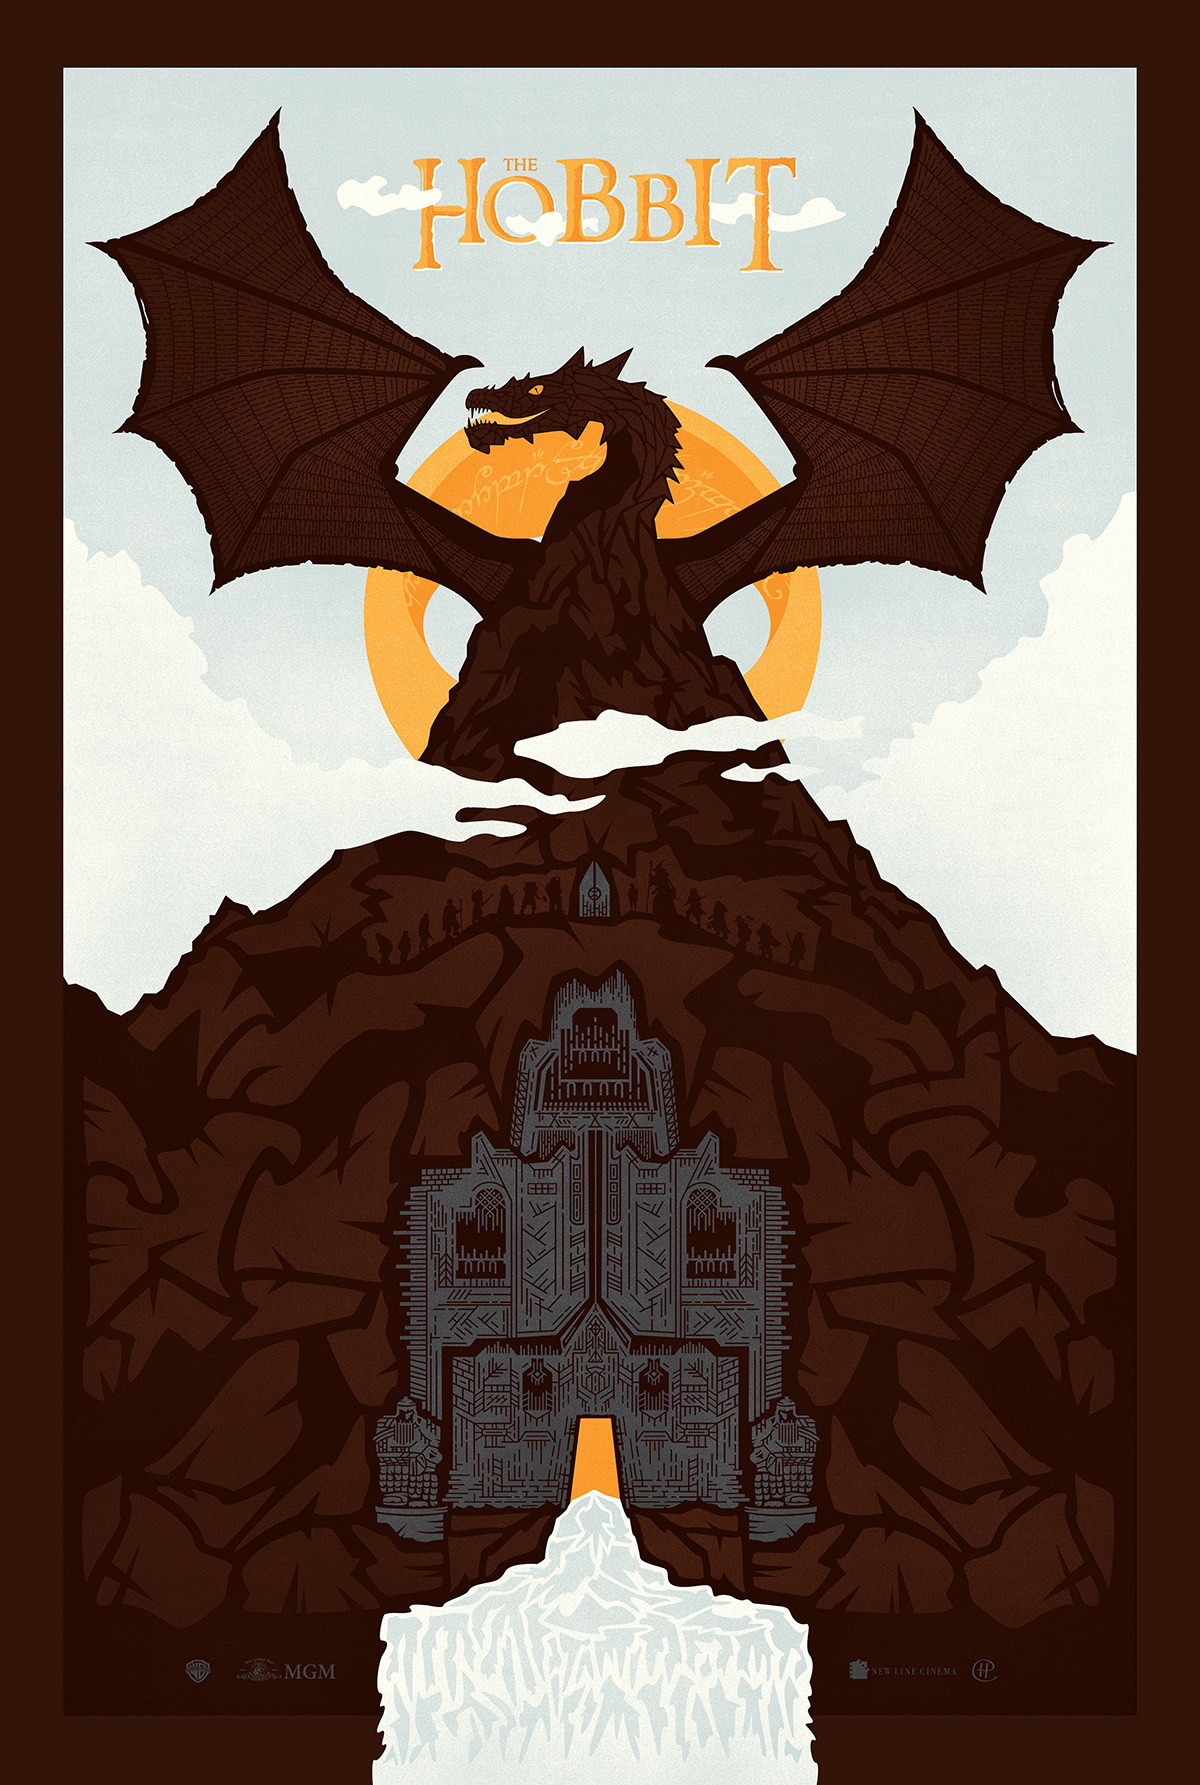 the Hobbit LOTR poster screen print movie poster lordoftherings dragon smaug Bilbo Baggins The lonely mountain